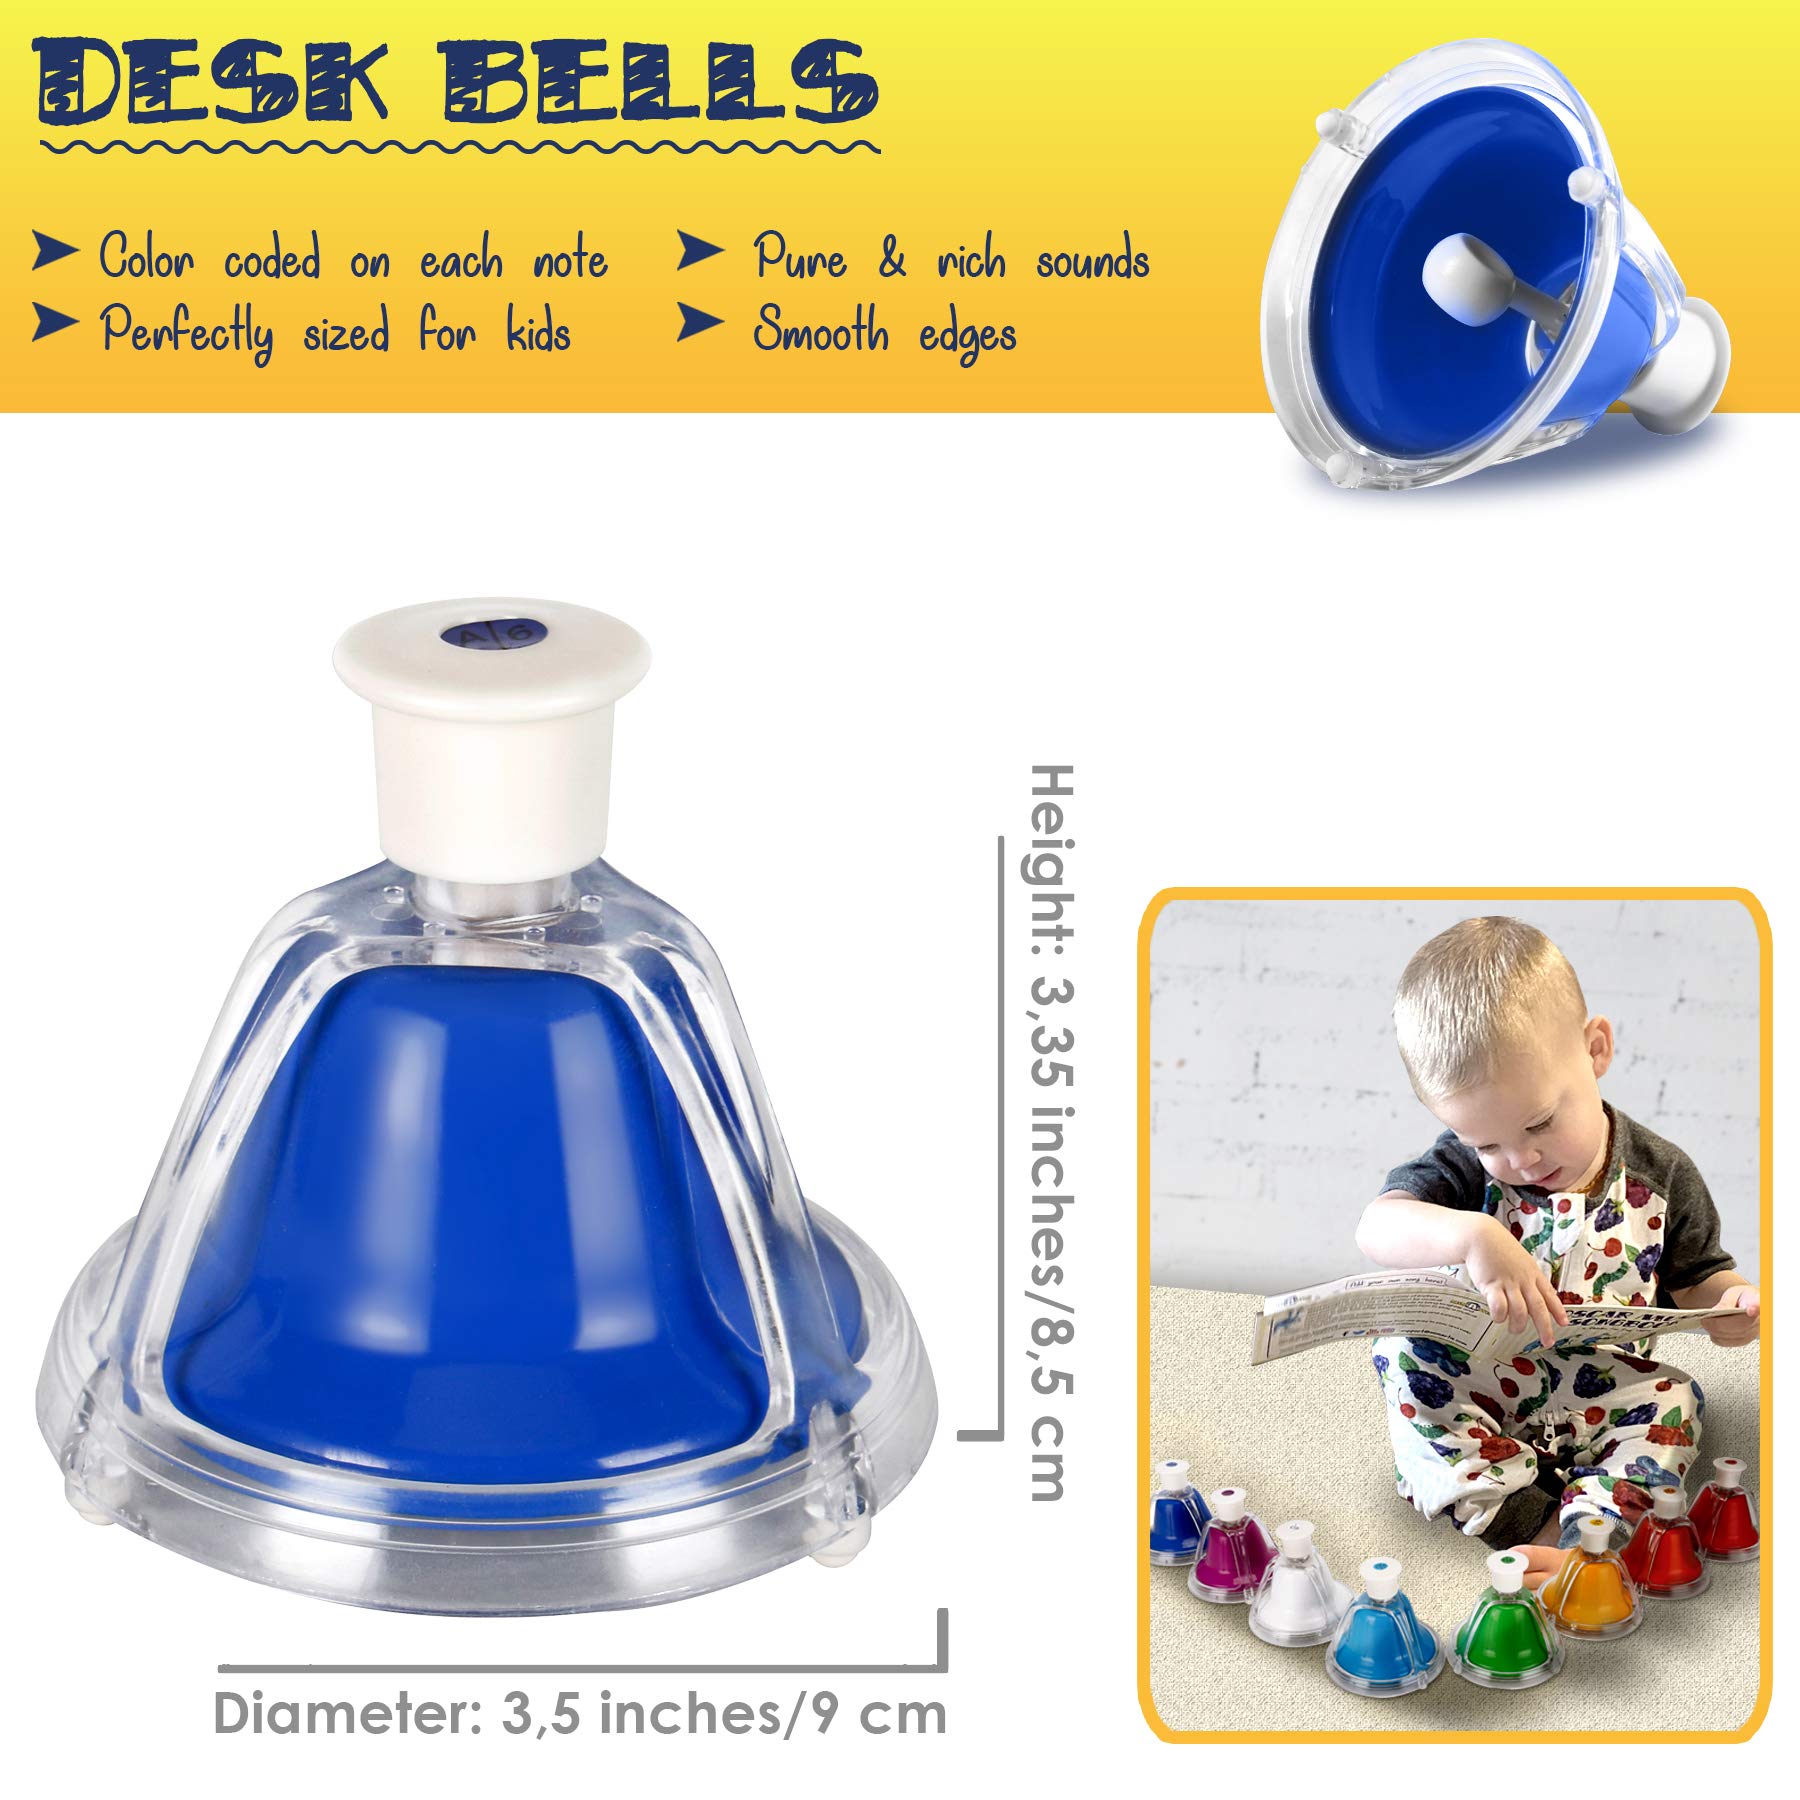 MINIARTIS Desk Bells for Kids | Educational Music Toys for Toddlers 8 Notes Colorful Hand Bells Set | Kids Musical Instrument wi